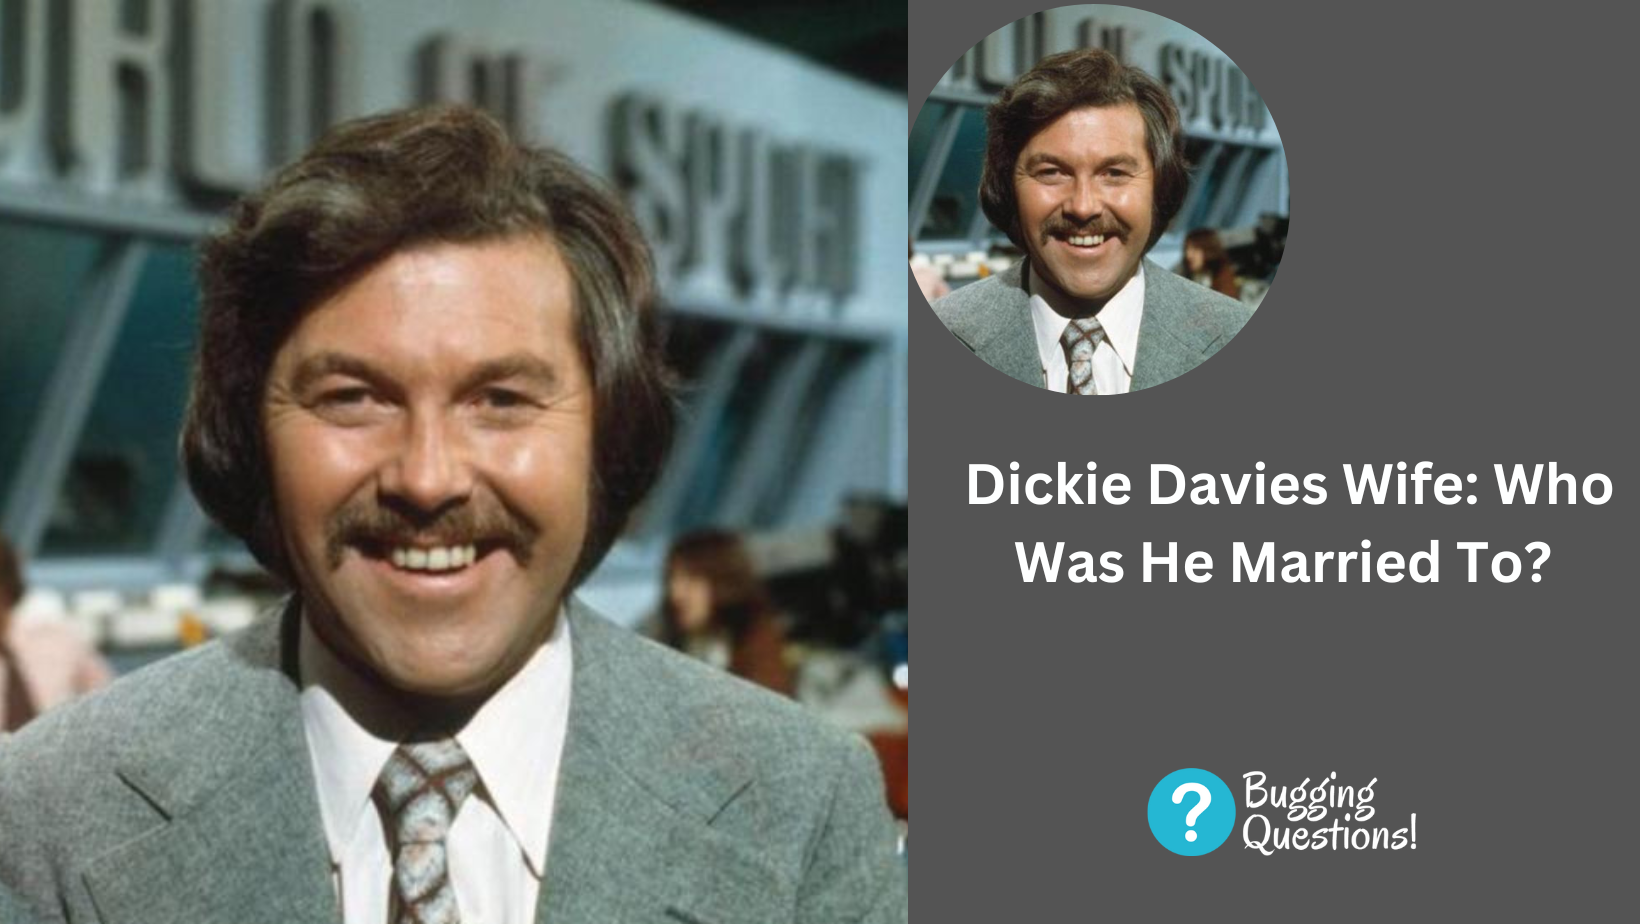 Dickie Davies Wife: Who Was He Married To? World Of Sport Presenter ‘Dickie Davies’ Dies Aged 94